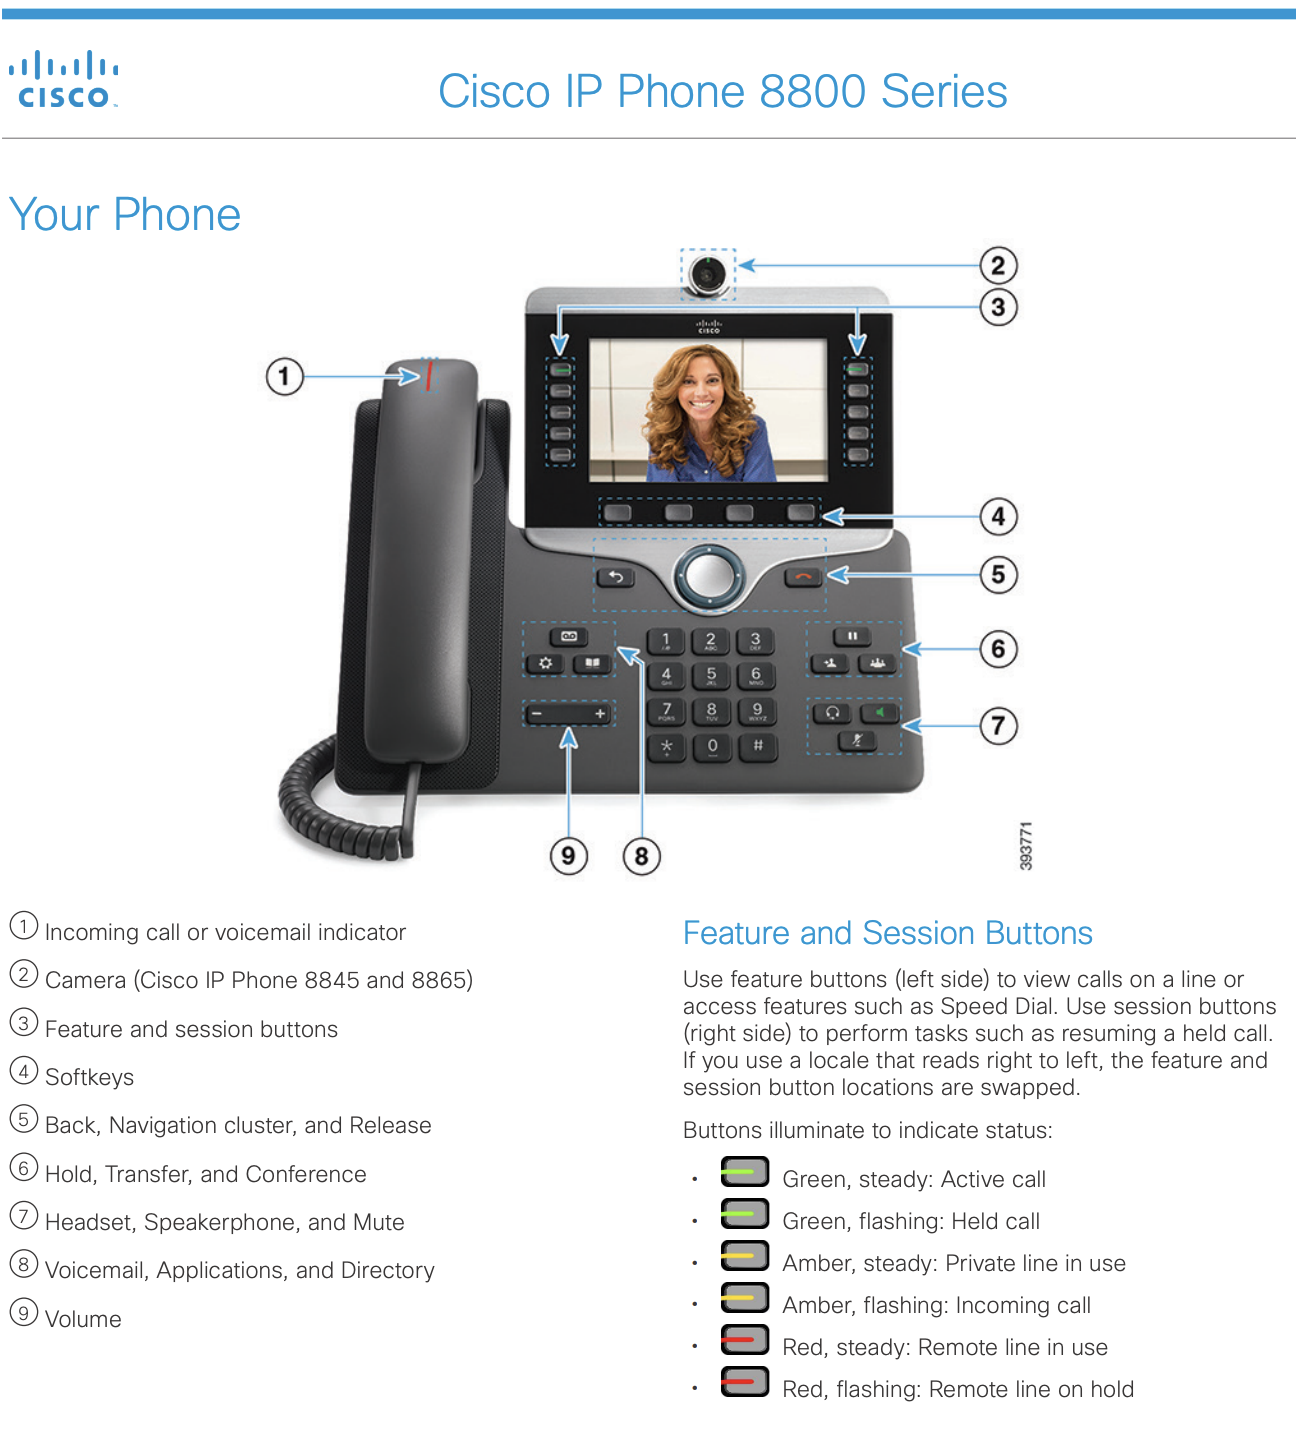 An image of the 800 series phone